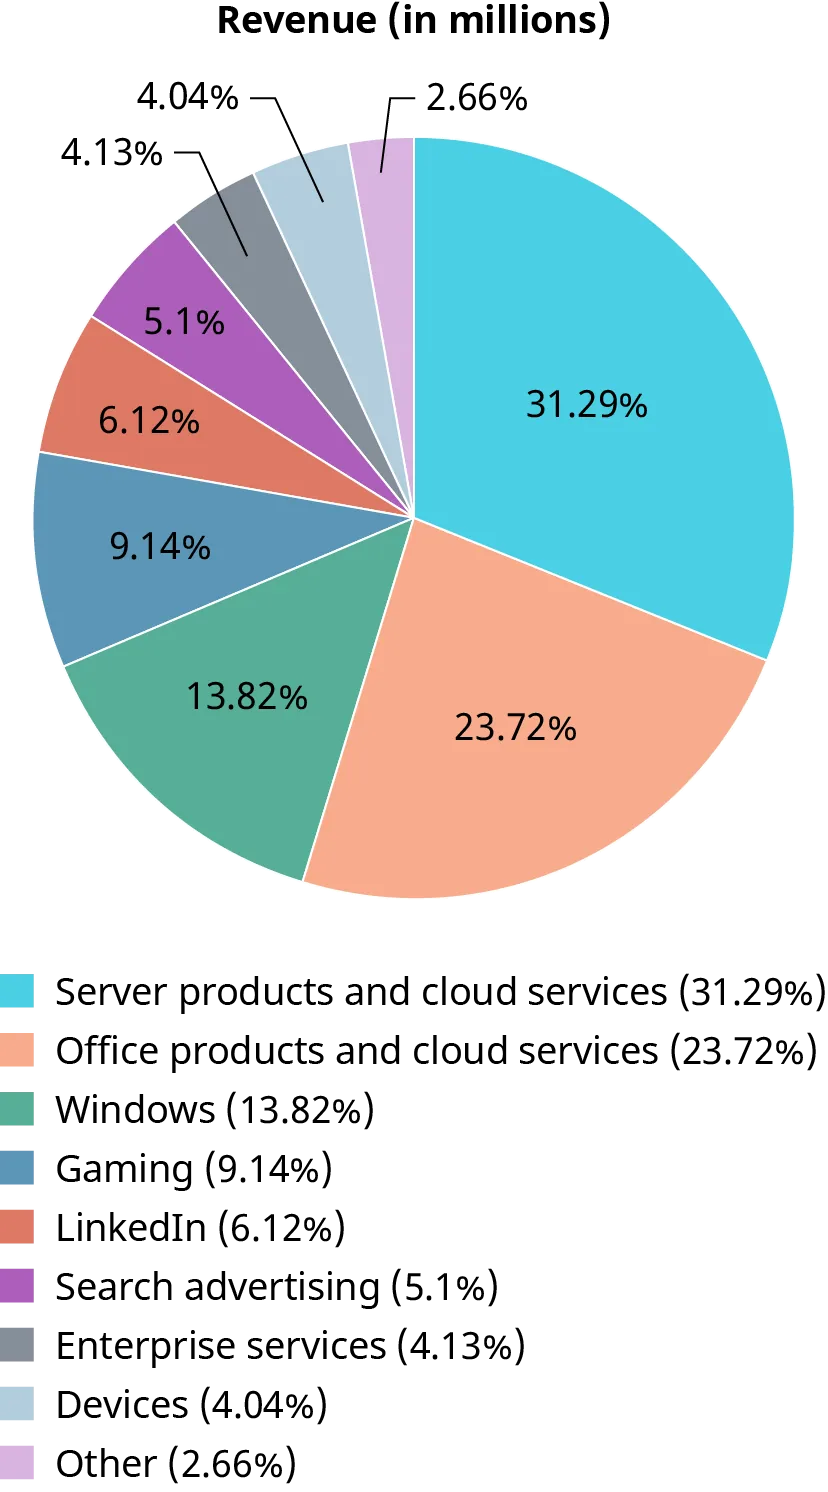 A pie chart shows the composition of Microsoft revenue: Server products and cloud services 31.29%; office products and cloud services 23.72%; Windows 13.82%; gaming 9.14%; LinkedIn 6.12%; search advertising 5.1%; enterprise services 4.13%; devices 4.04%; and other 2.66%.